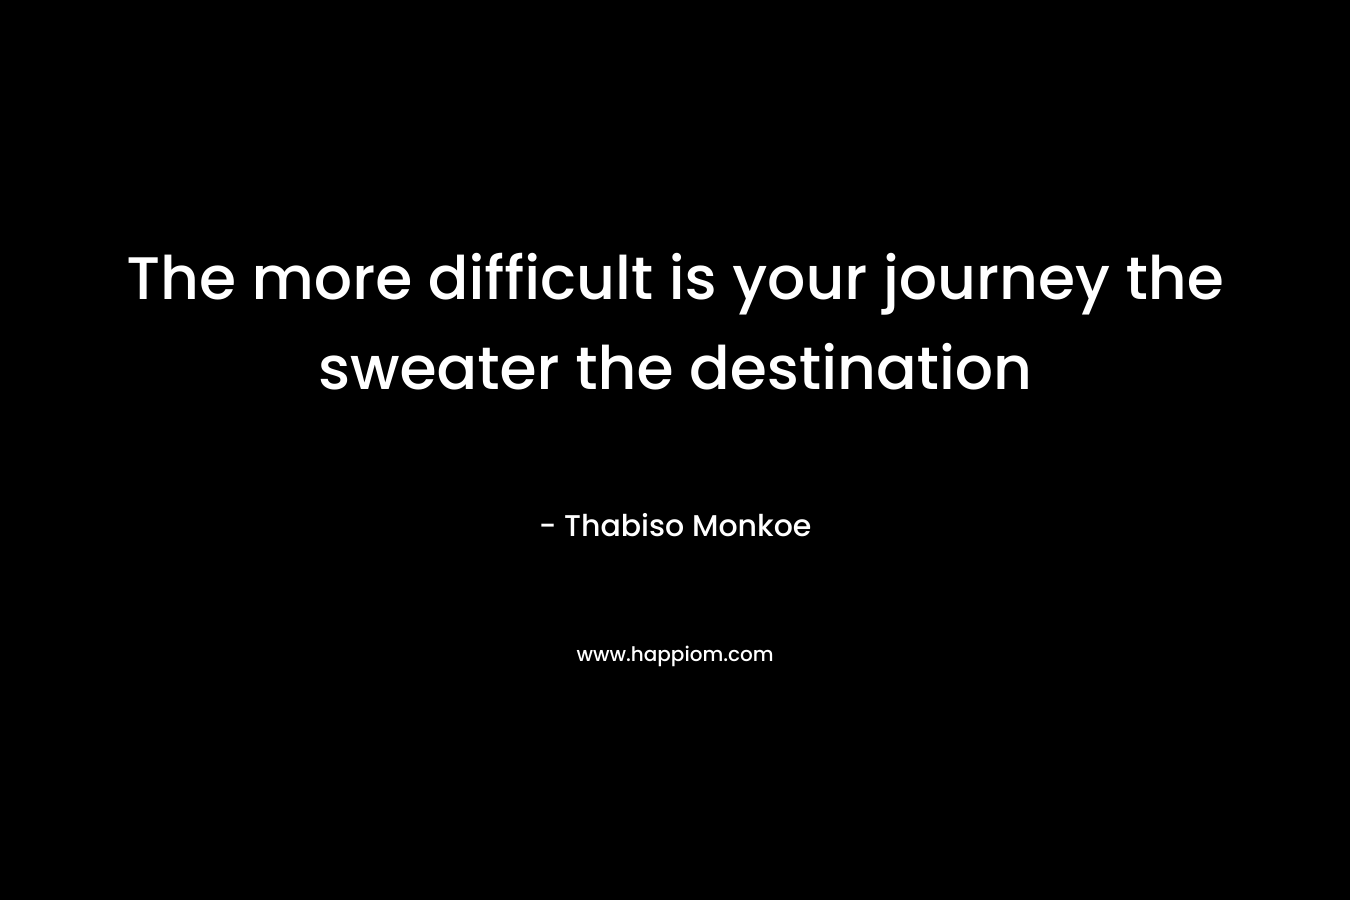 The more difficult is your journey the sweater the destination